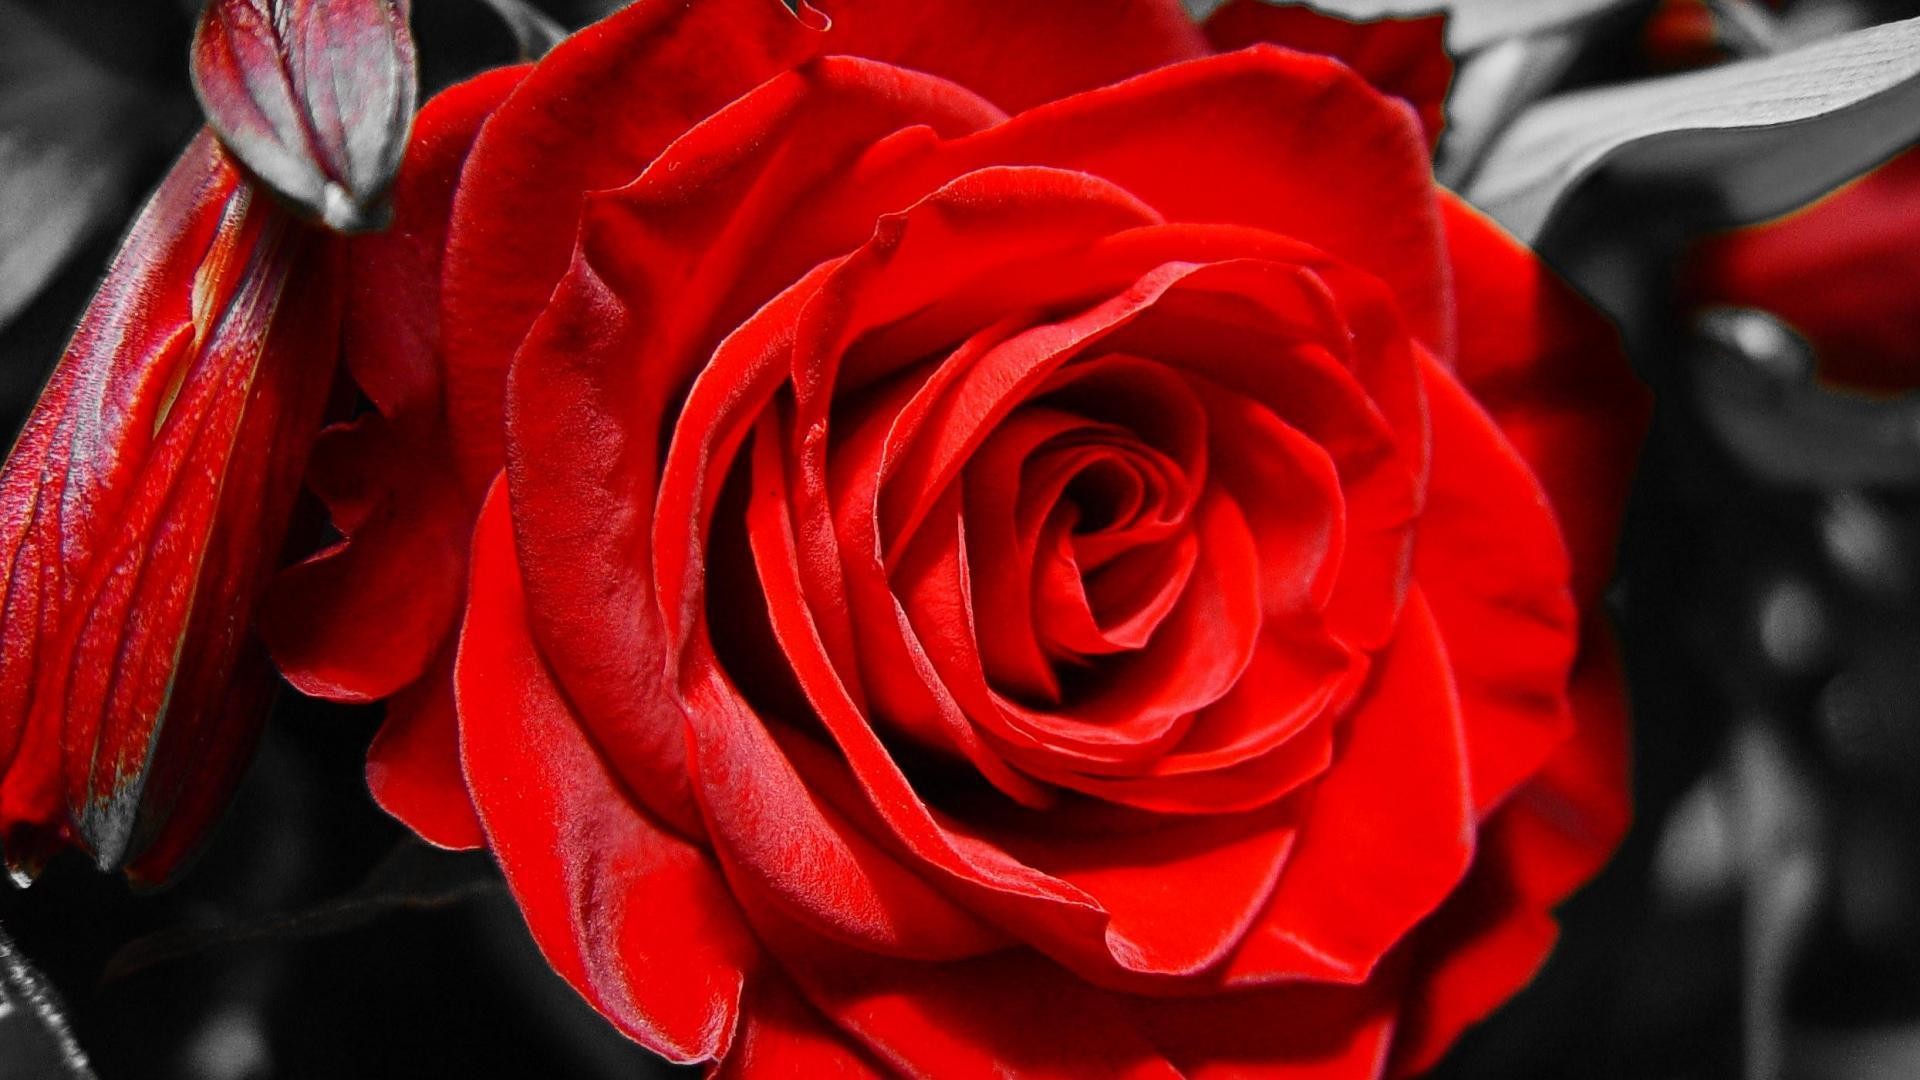 1920x1080 Red rose on black and white background on March 8 wallpapers and .